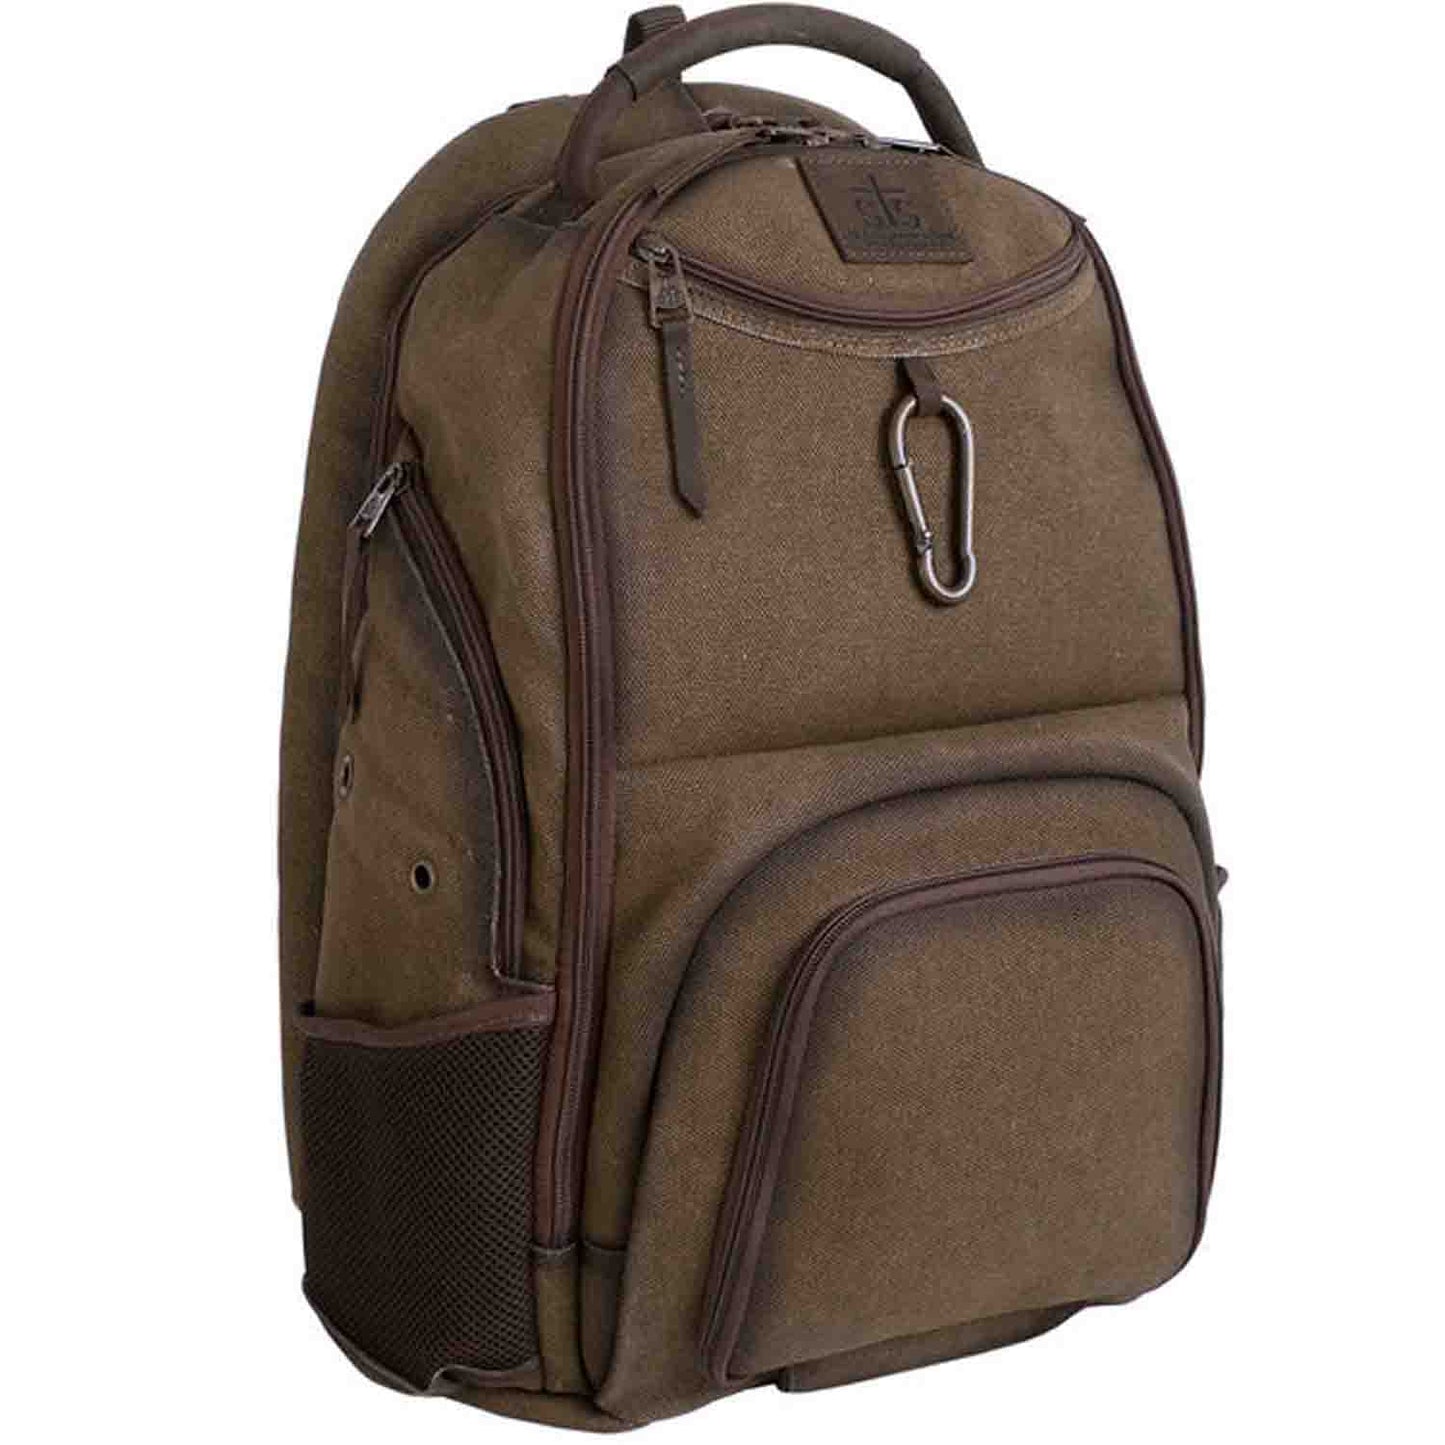 Trailblazer Utility Backpack in Brown by STS Ranchwear